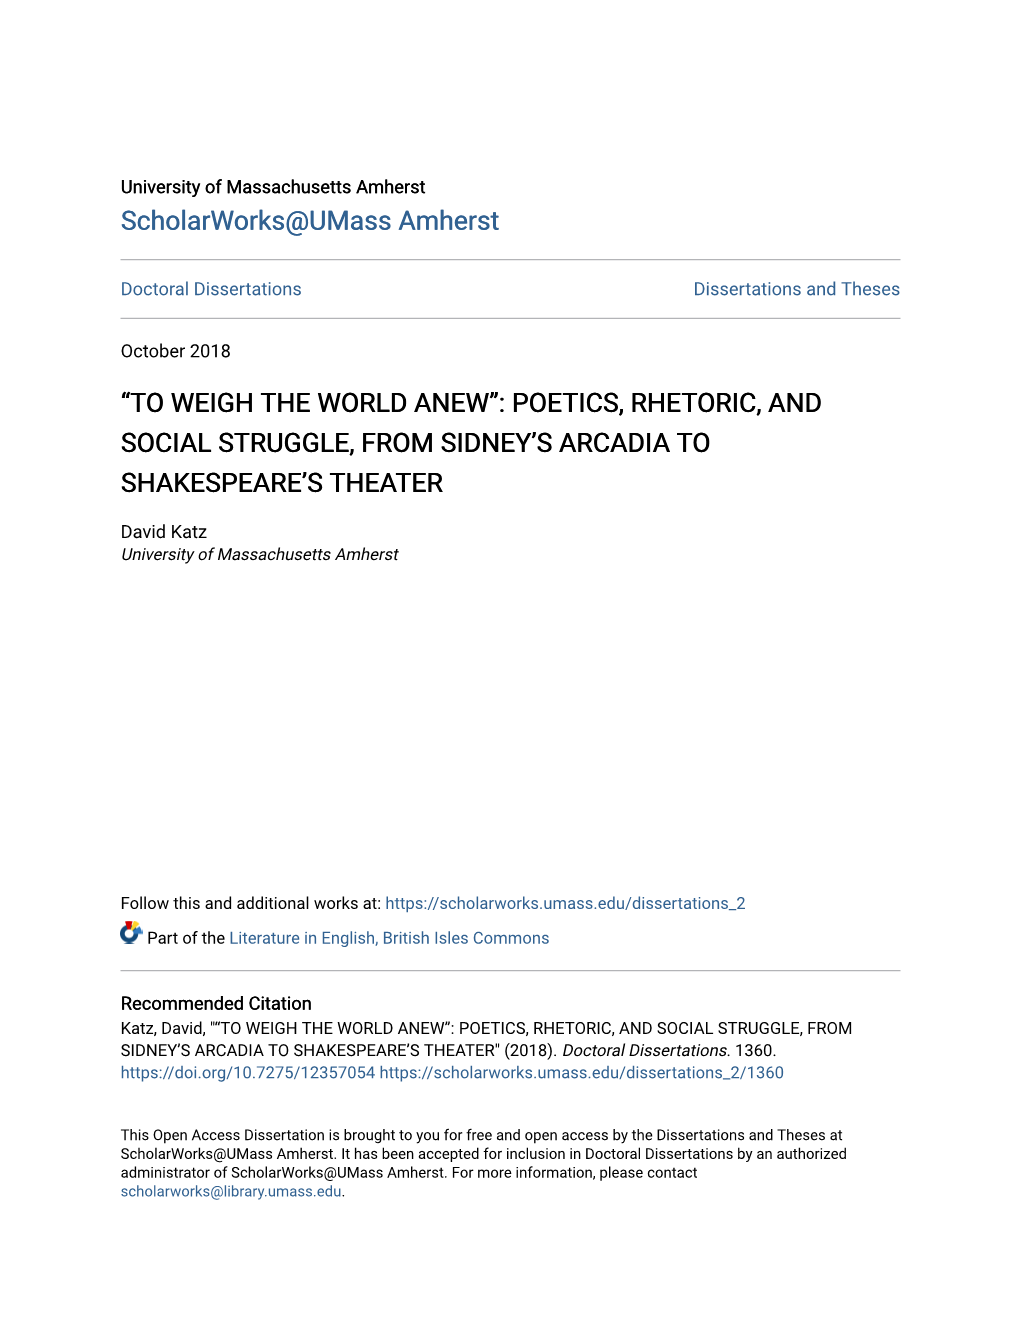 “To Weigh the World Anew”: Poetics, Rhetoric, and Social Struggle, from Sidney’S Arcadia to Shakespeare’S Theater